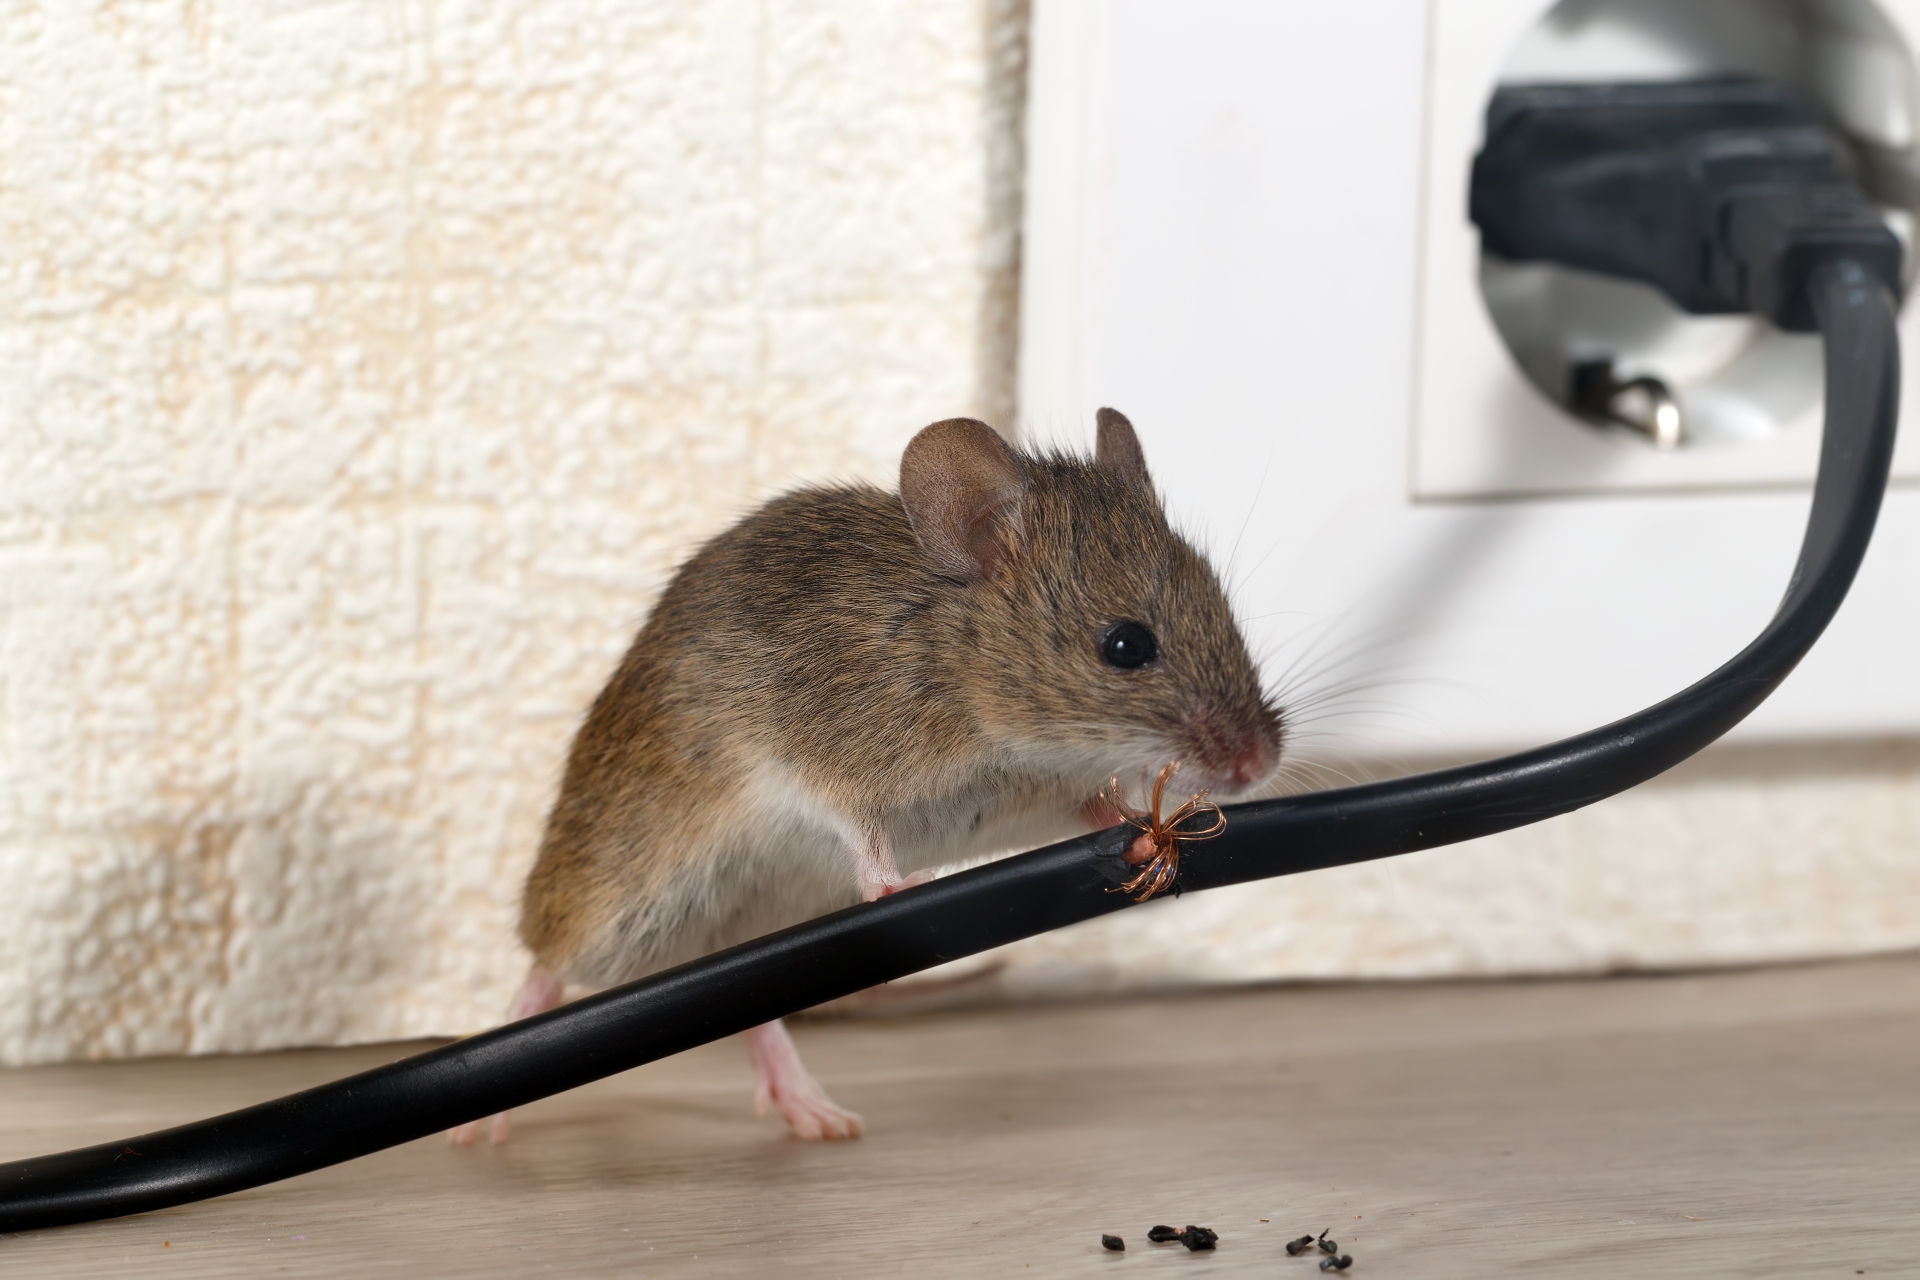 Mice Infestation, Pest Control in Bexley, DA5. Call Now 020 8166 9746